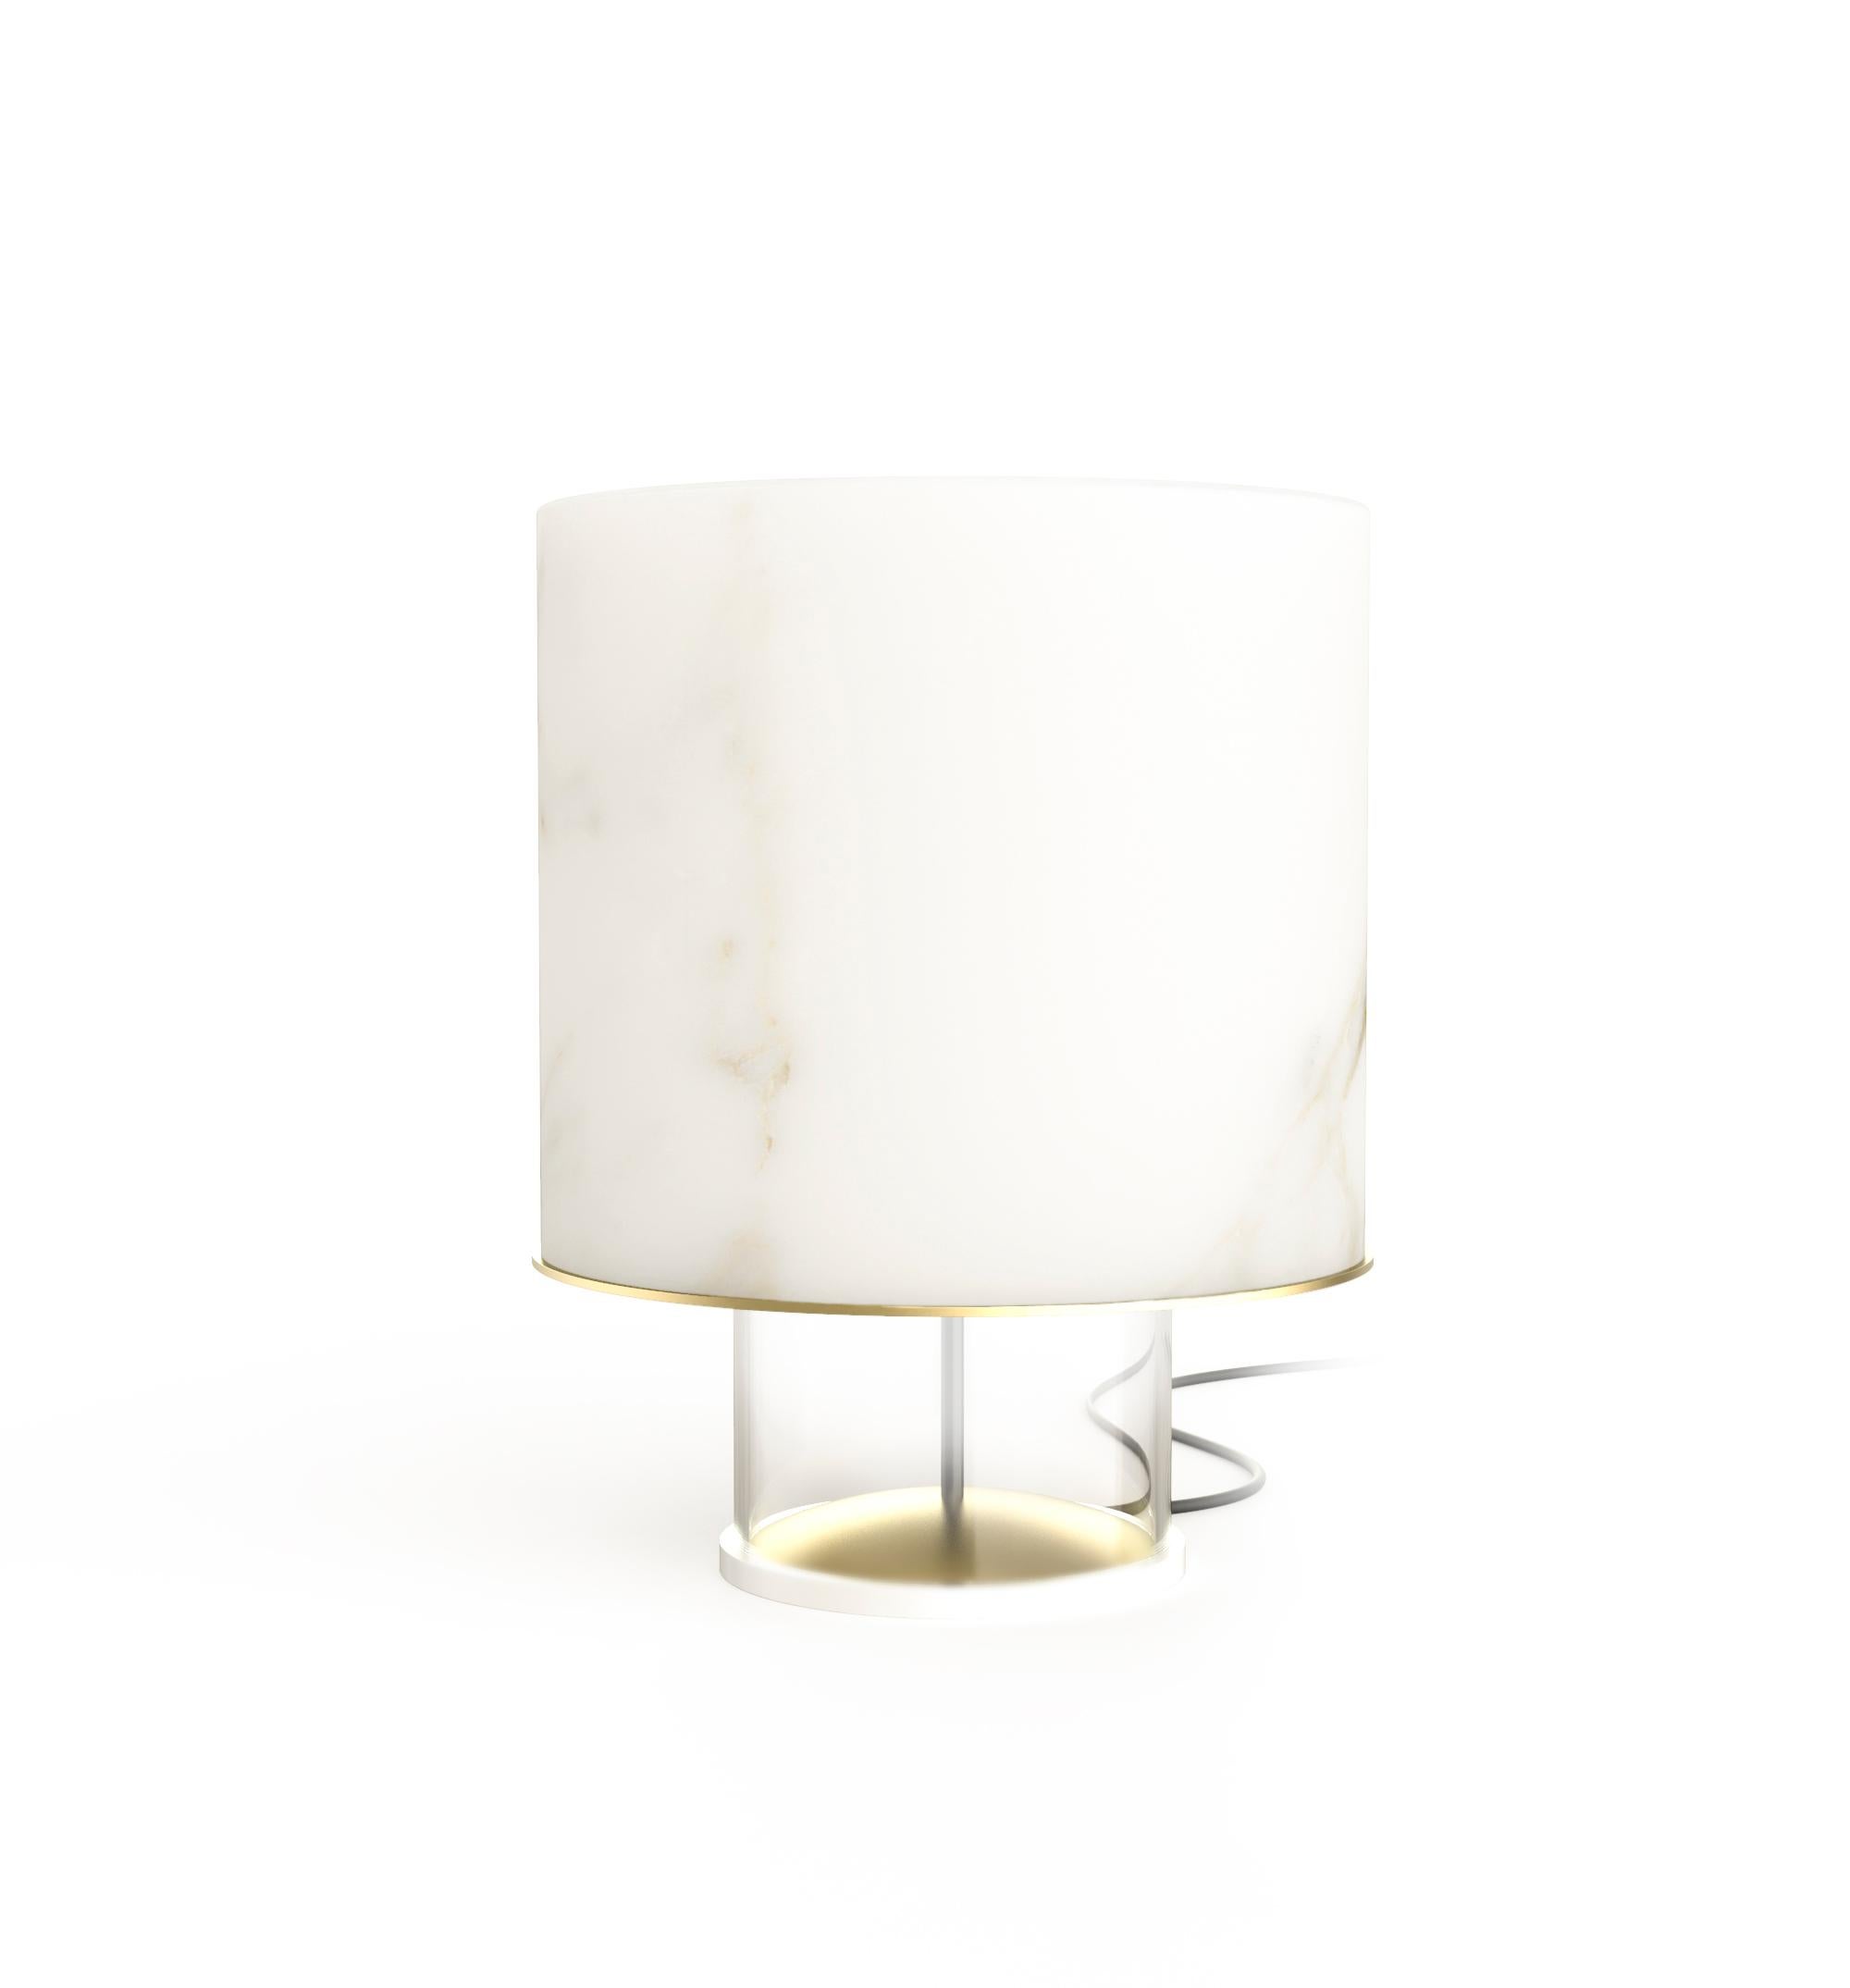 Capsule Module2 table lamp by Marmi Serafini
Materials: Calcatta Oro marble.
Dimensions: D 28 x H 36 cm
Available in other marbles.

This elegant table lamp is available in three different versions, distinguish by top marble part.
Once light